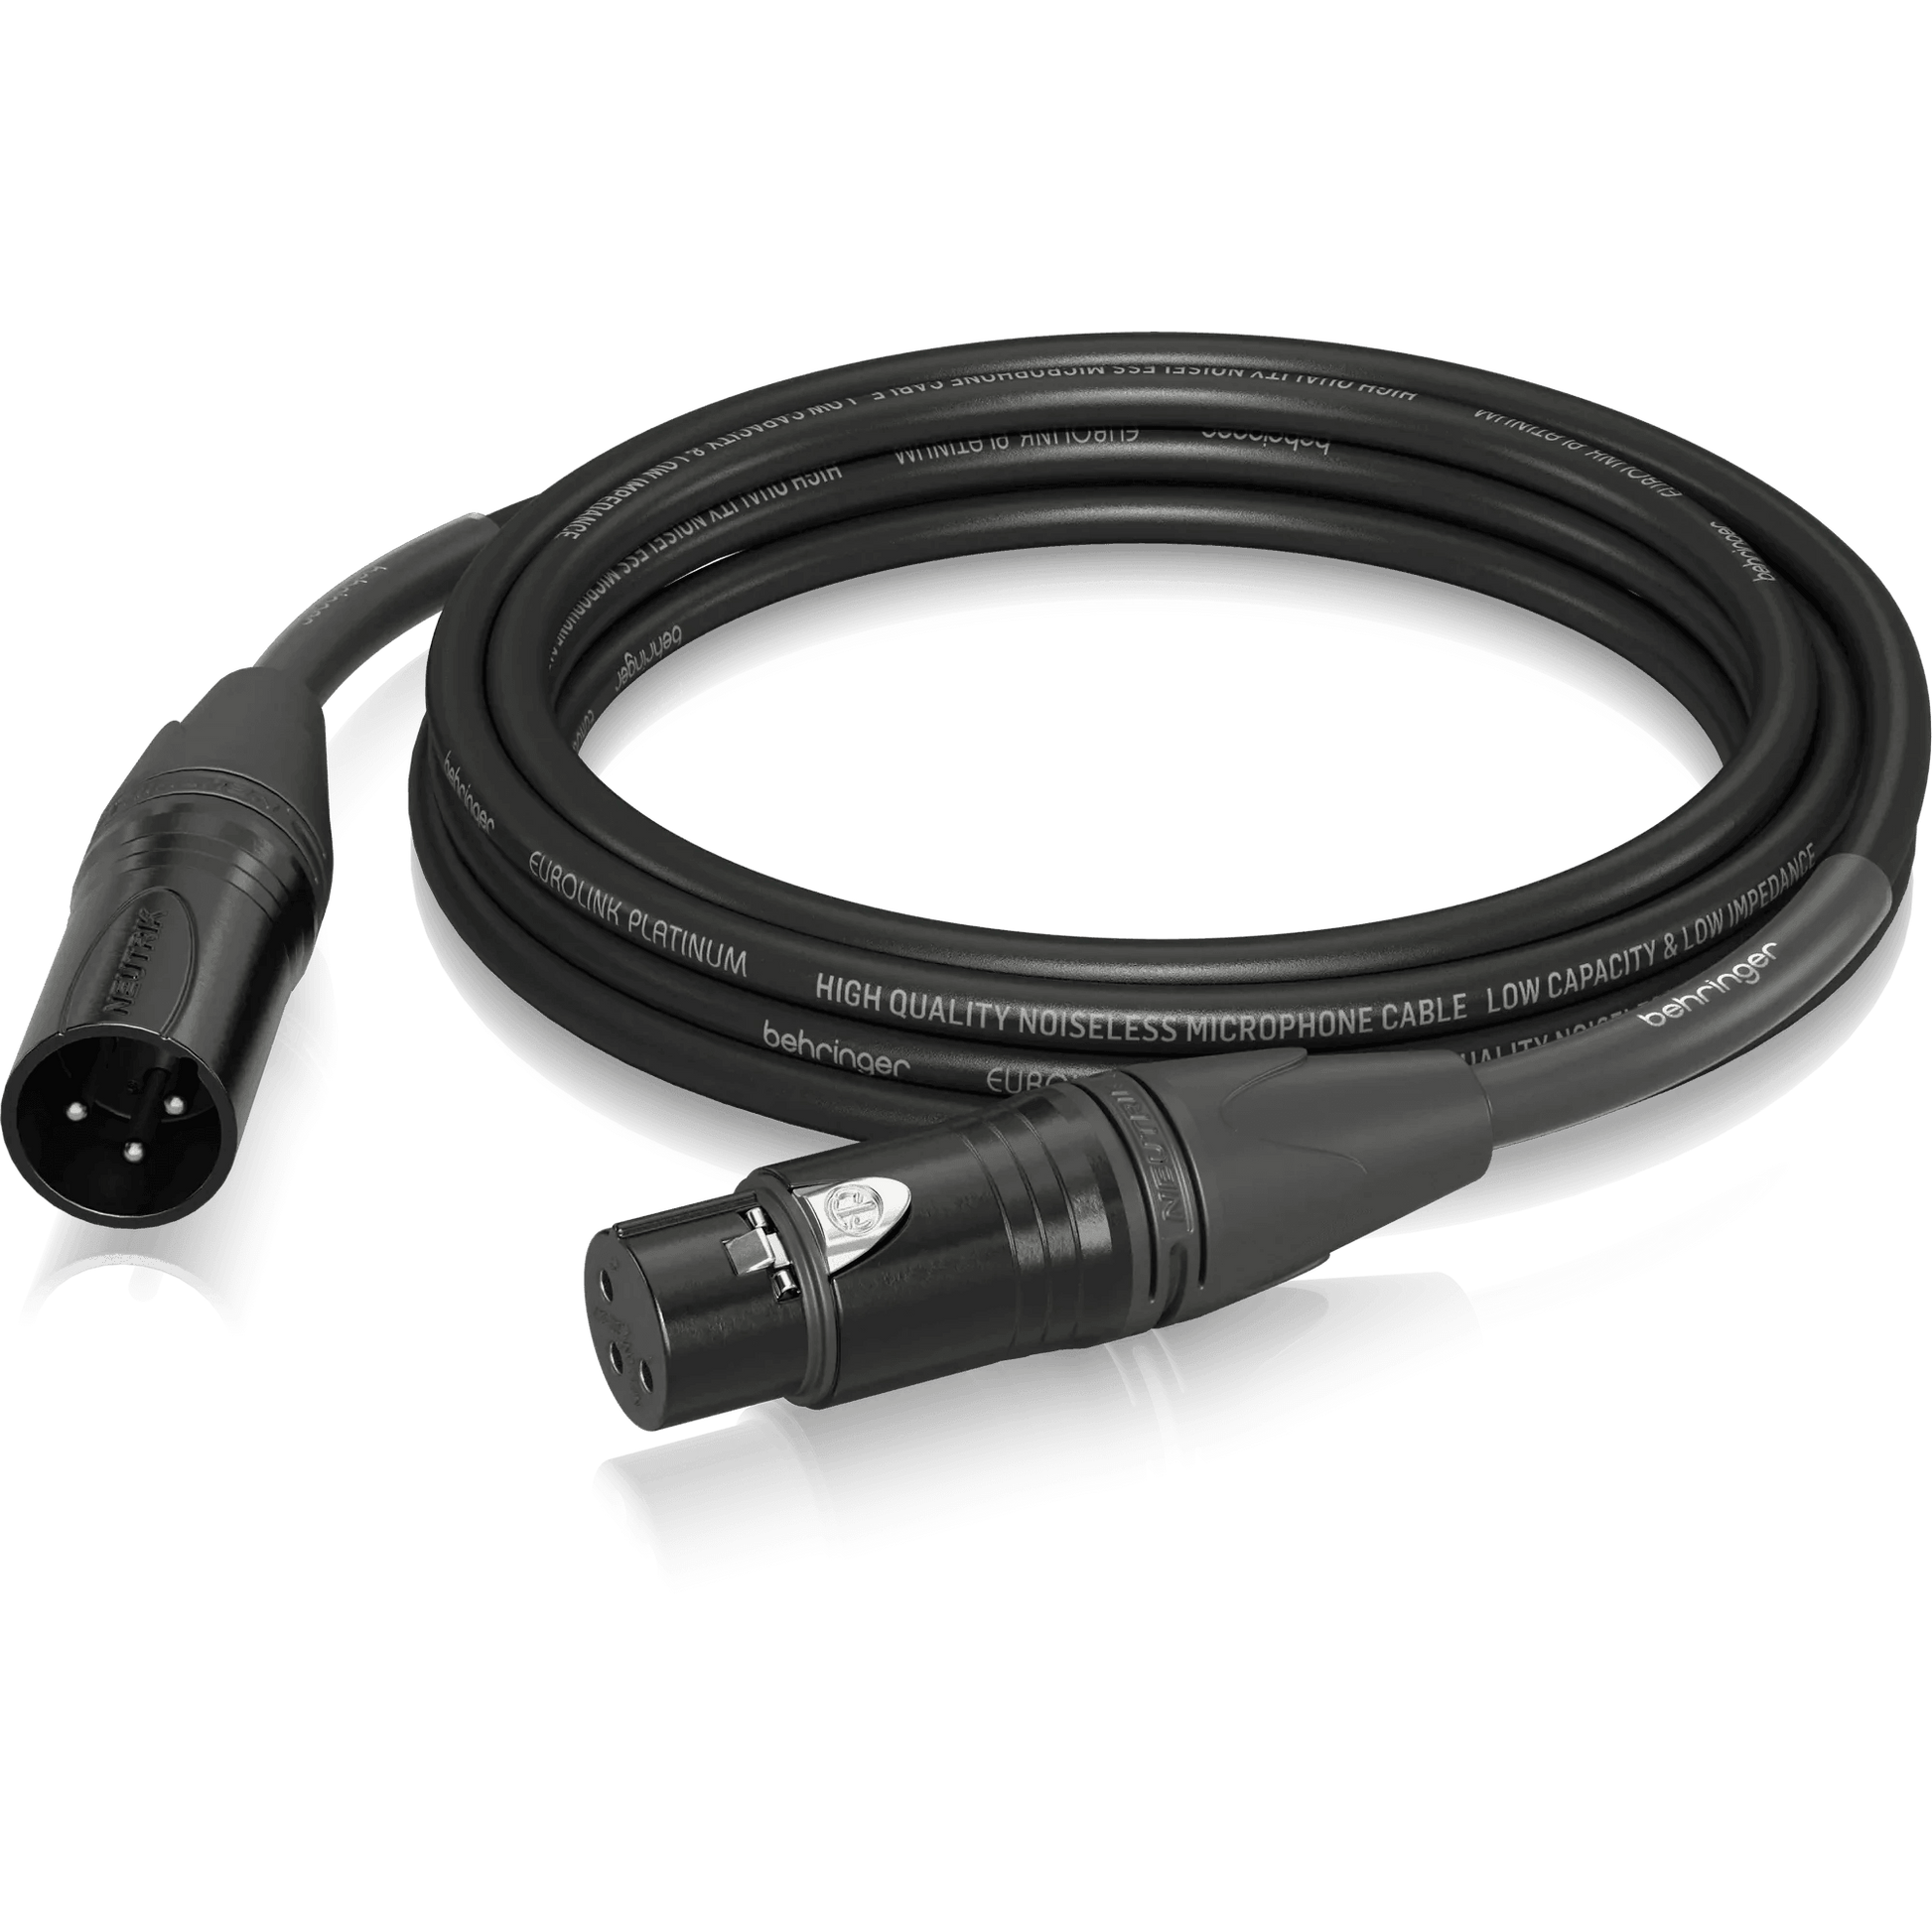 Behringer PMC-500 Platinum Performance 5 m (16.4 ft) Microphone Cable with XLR Connectors